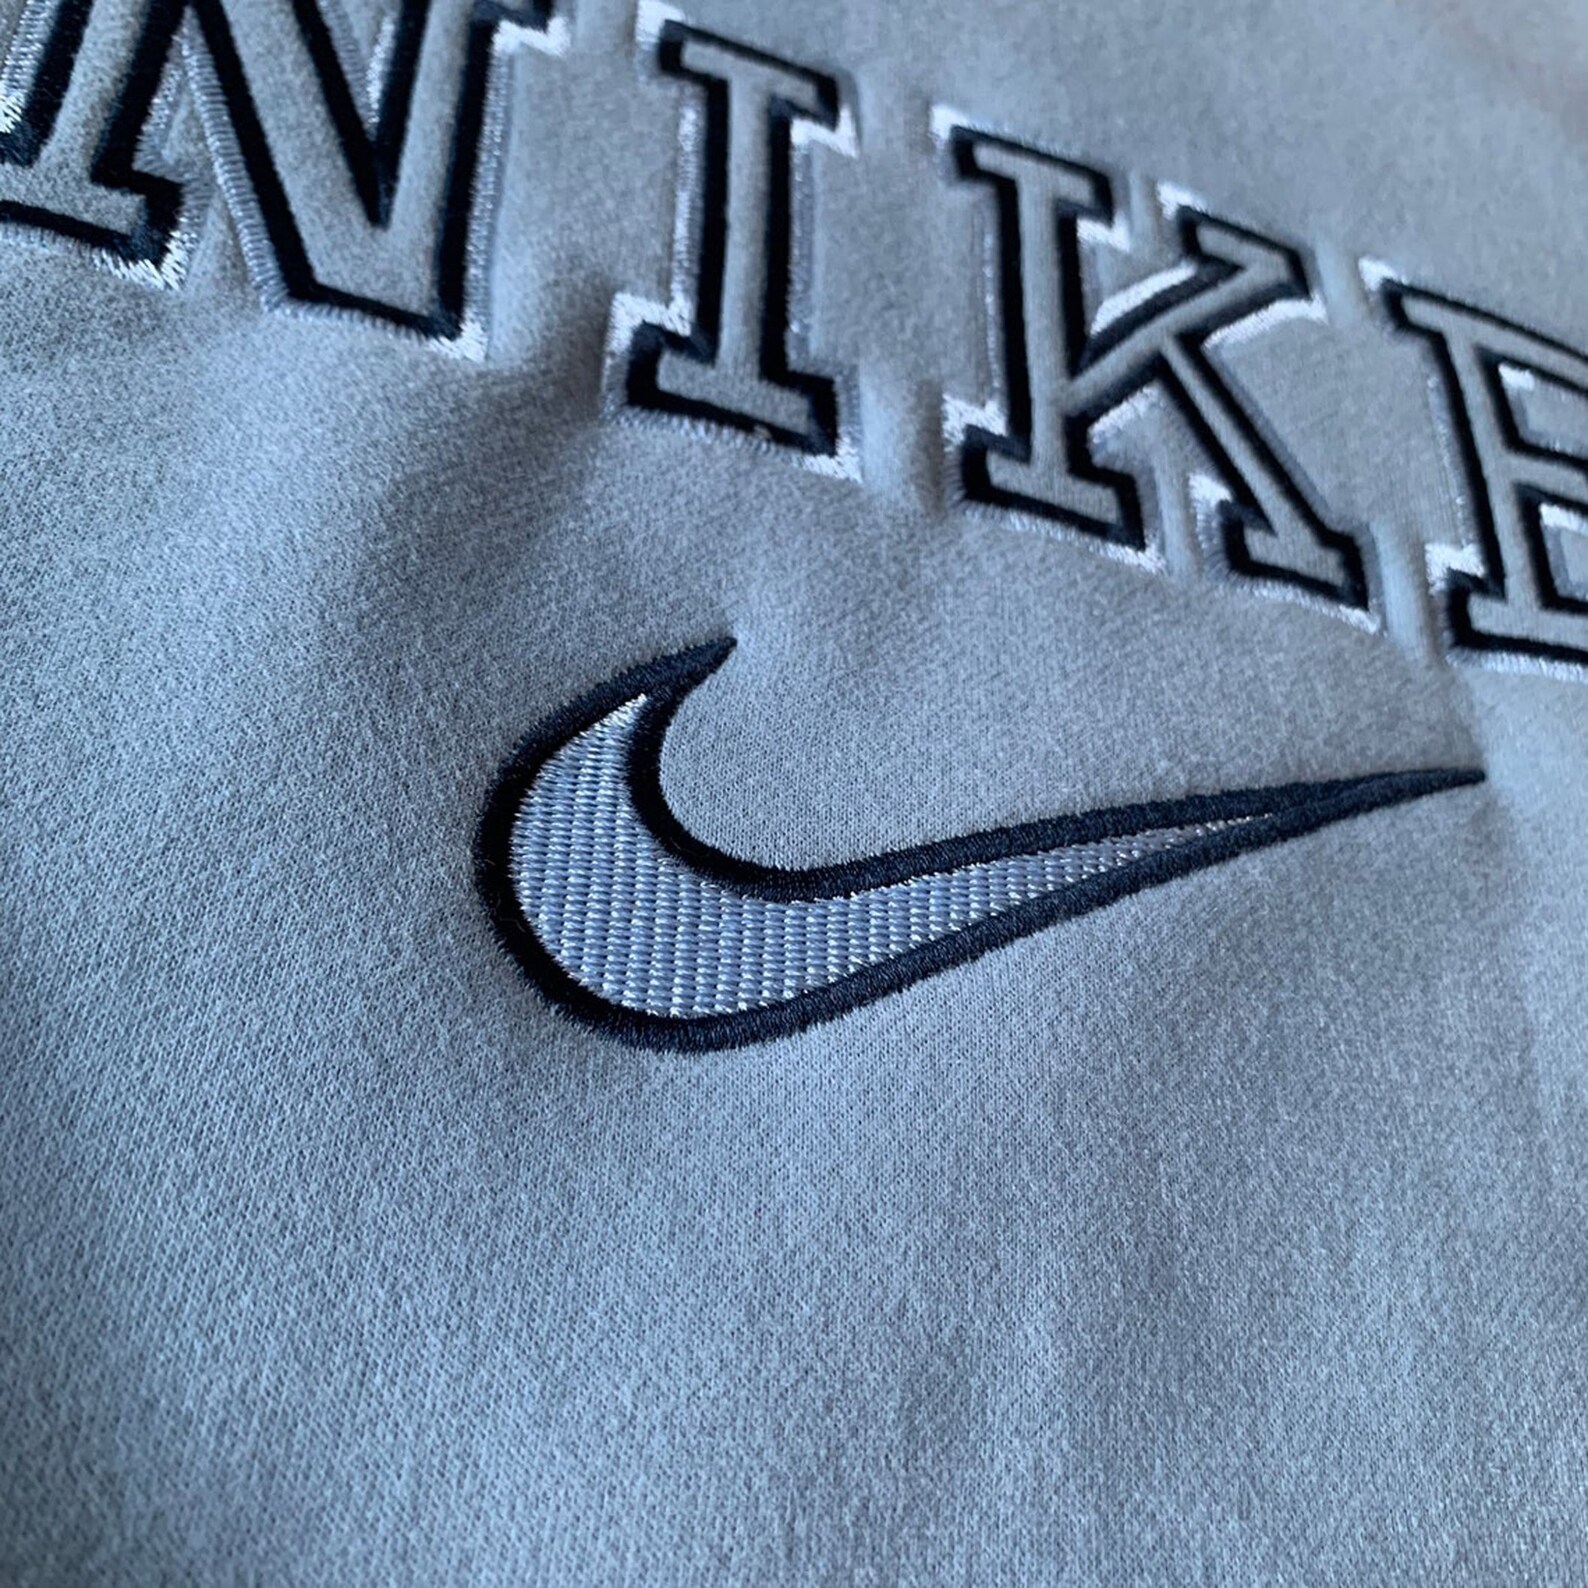 Vintage Nike Spell Out Embroidered Sweatshirt 90s Retro | Etsy